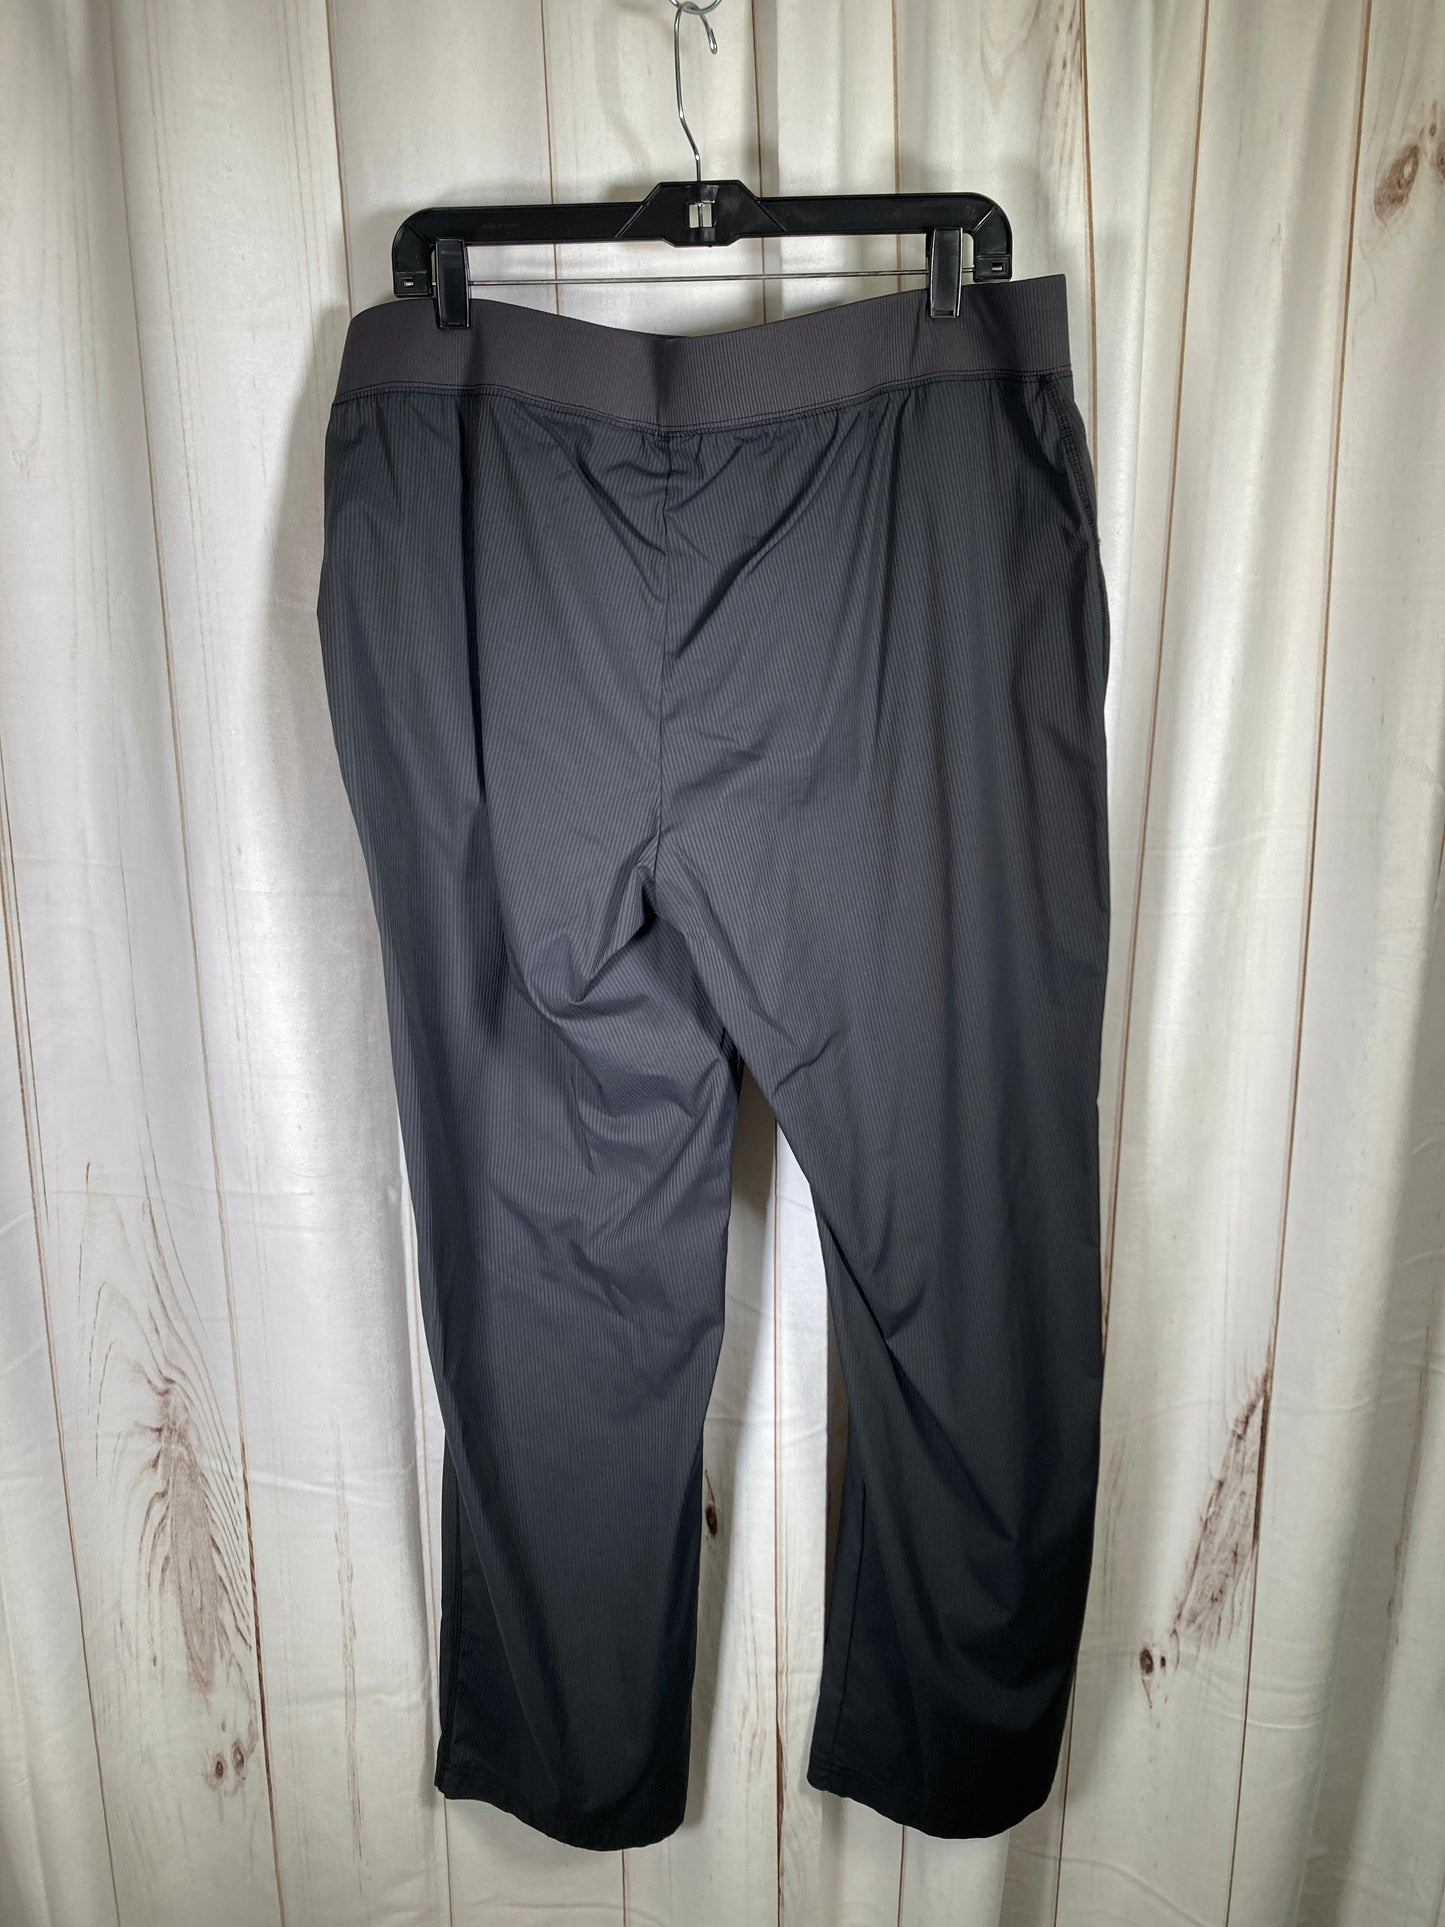 Athletic Pants 2pc By Zenergy By Chicos  Size: Xl